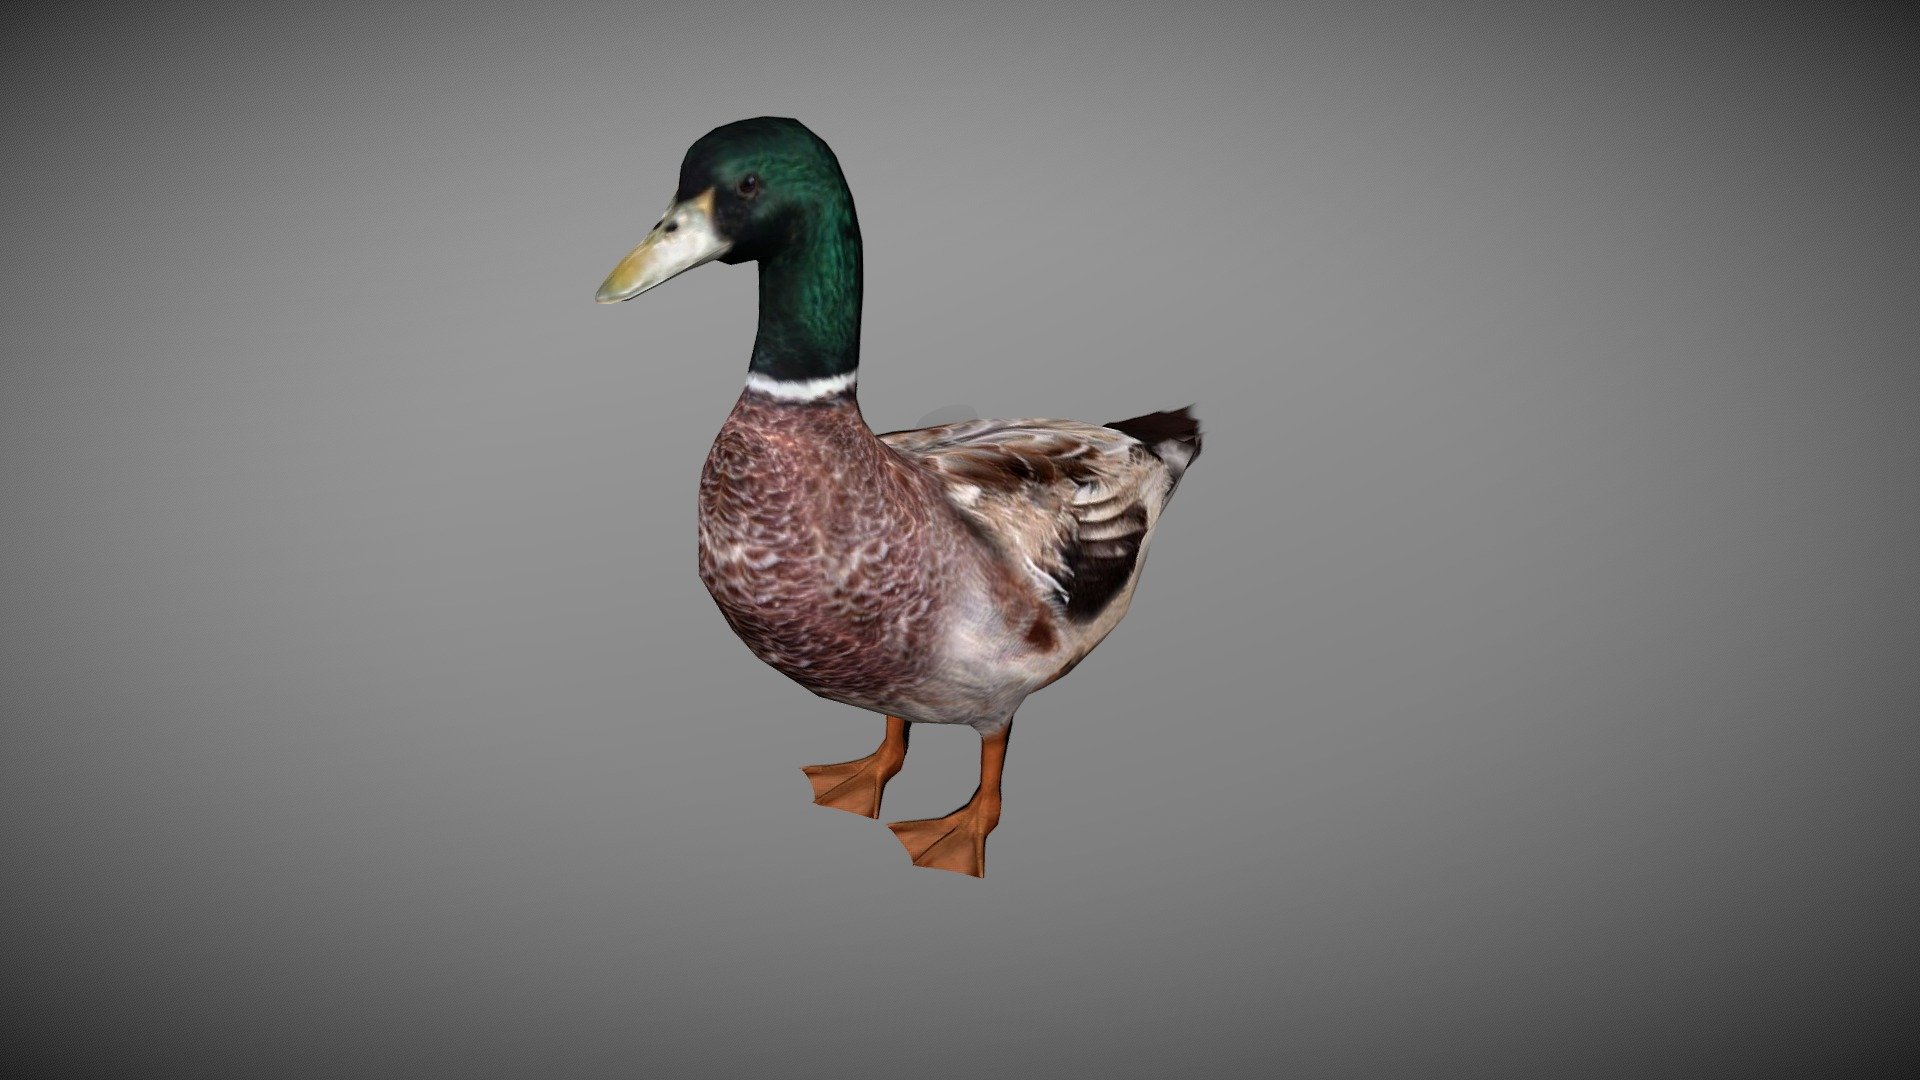 WATCH = https://youtu.be/FWDBqAXRHTg
3D Male Duck Realistic Character


PACKAGE INCLUDE



High quality polygonal model, correctly scaled for an accurate representation of the original object.

Model is built to real-world scale.

Many different format like blender, fbx, obj, iclone, dae

No additional plugin is needed to open the model.

3d print ready in different poses

Separate Loopable Animations

Ready for animation

High Quality materials and textures

Triangles = 1592

Vertices = 837

Edges = 2431

Faces = 1592


ANIMATIONS



Idle

Walk

Eat

+Many different 3d Print Poses


NOTE



GIVE CREDIT BILAL CREATION PRODUCTION

SUBSCRIBE YOUTUBE CHANNEL = https://www.youtube.com/BilalCreation/playlists

FOLLOW OUR STORE = https://sketchfab.com/bilalcreation/models

LIKE AND GIVE FEEDBACK ON THE MODEL


CONTACT US                 =  https://sites.google.com/view/bilalcreation/contact-us

ORDER  DONATION   =  https://sites.google.com/view/bilalcreation/order - DUCK MALE ANIMATED - Buy Royalty Free 3D model by Bilal Creation Production (@bilalcreation) 3d model